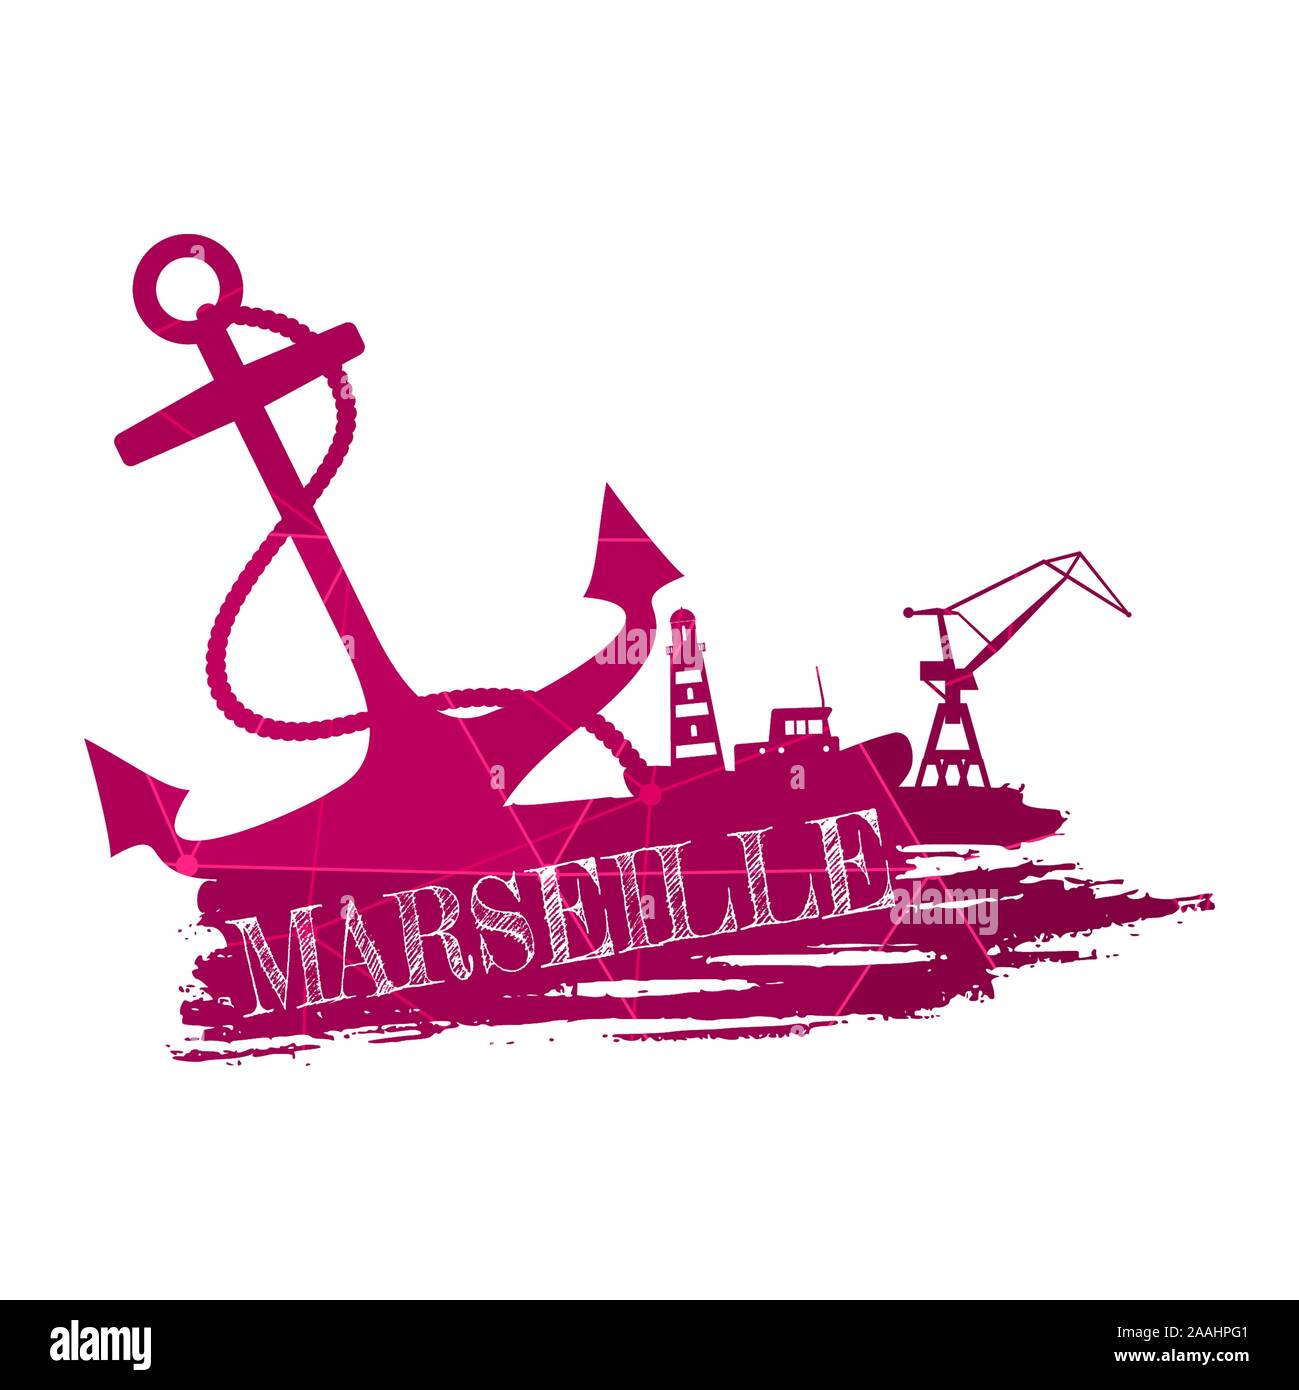 Anchor, lighthouse, ship and crane icons on brush stroke. Calligraphy inscription. Marseille city name text. Connected lines with dots. Stock Vector